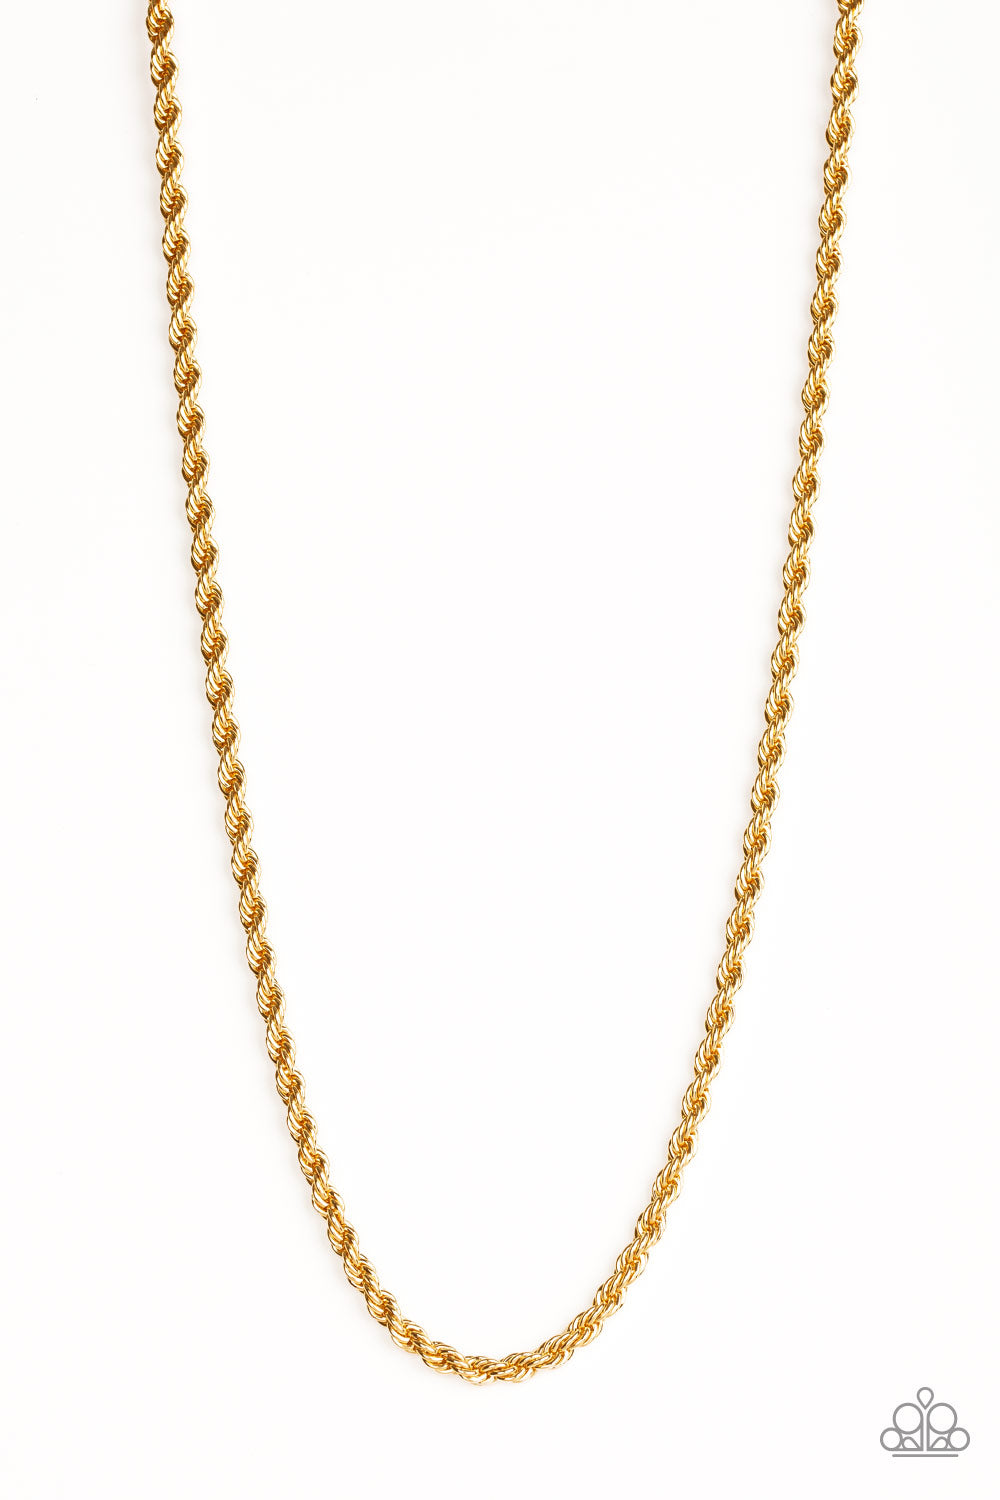 DOUBLE DRIBBLE - GOLD URBAN NECKLACE